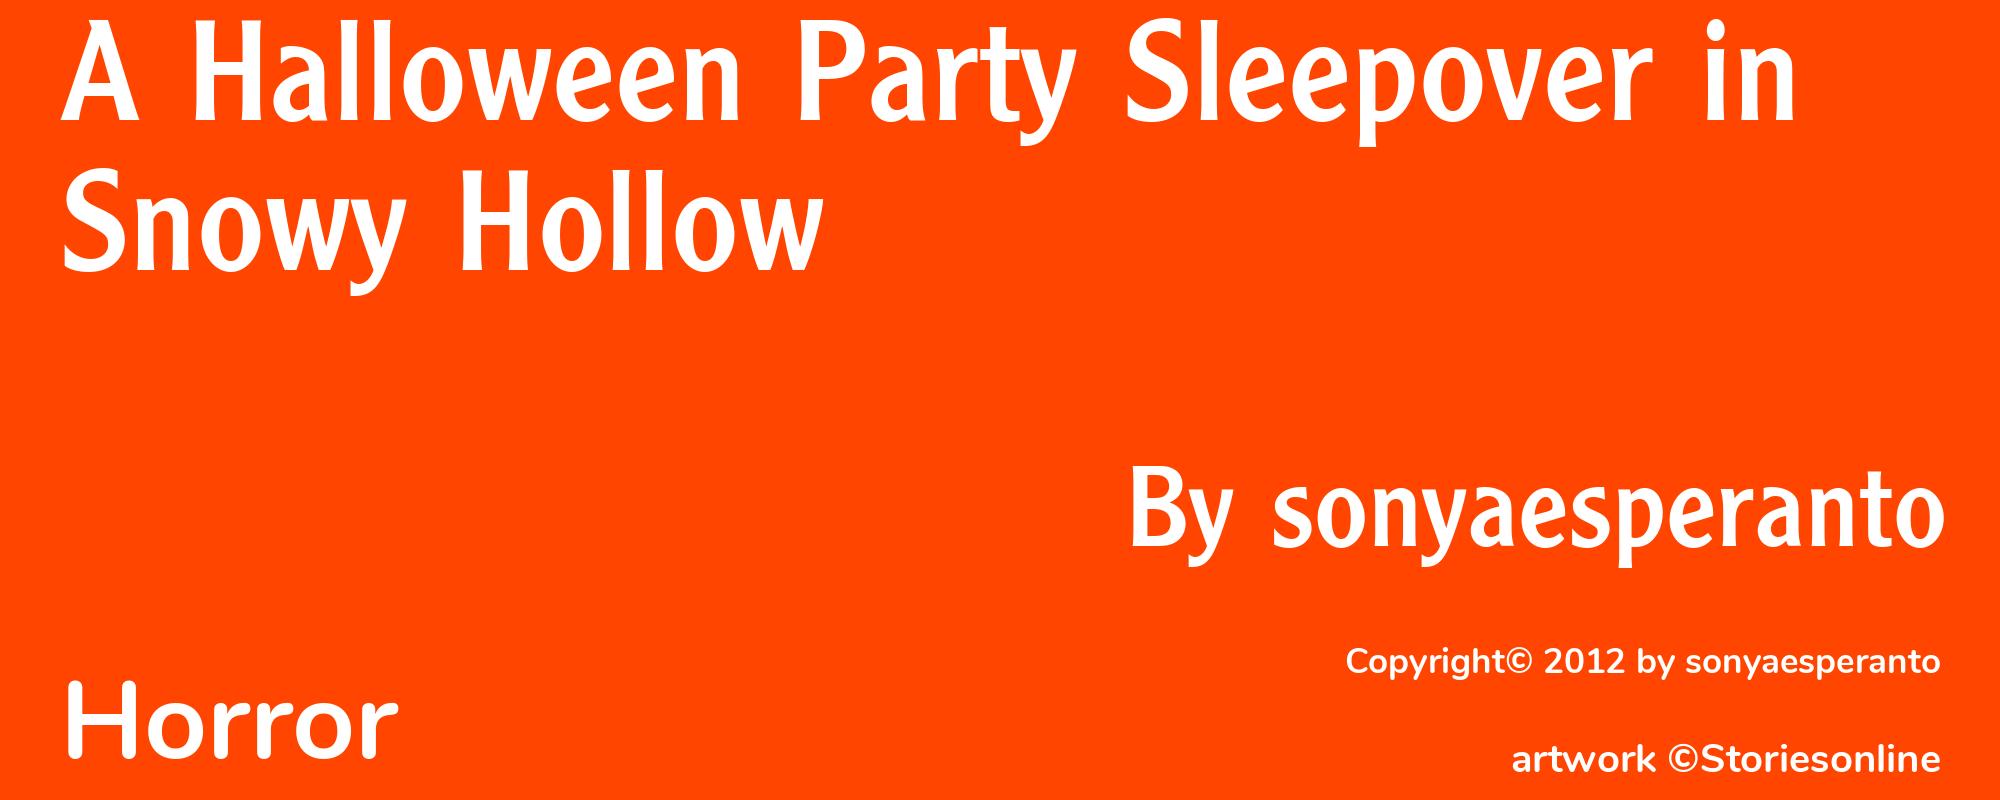 A Halloween Party Sleepover in Snowy Hollow - Cover